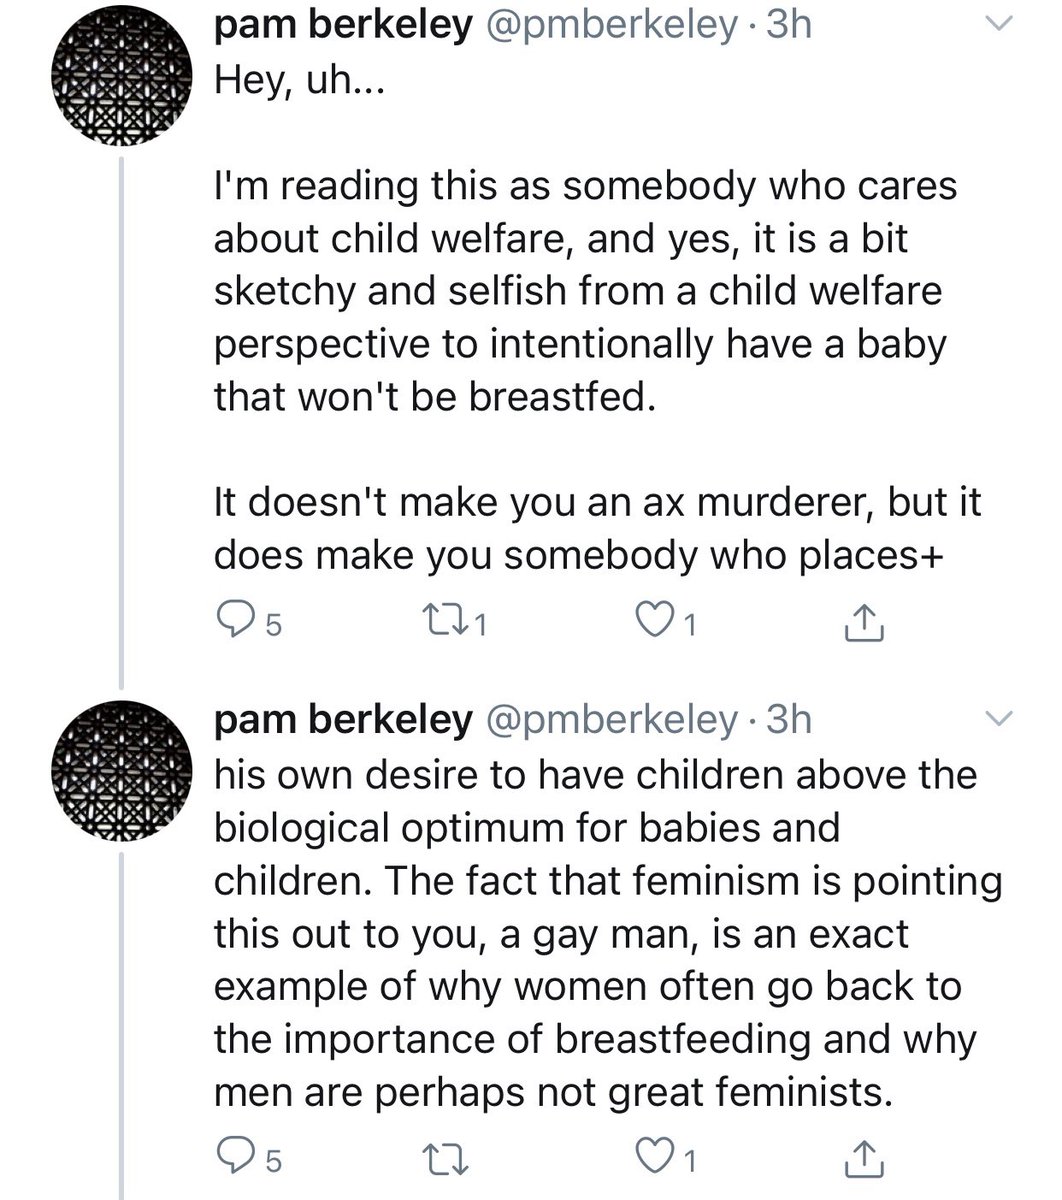 Good to know we are not as bad as a murderer if my husband and I are lucky enough to start a family and obviously can’t breastfeed. Also the 1950s is calling, not all mothers can or will breastfeed. 